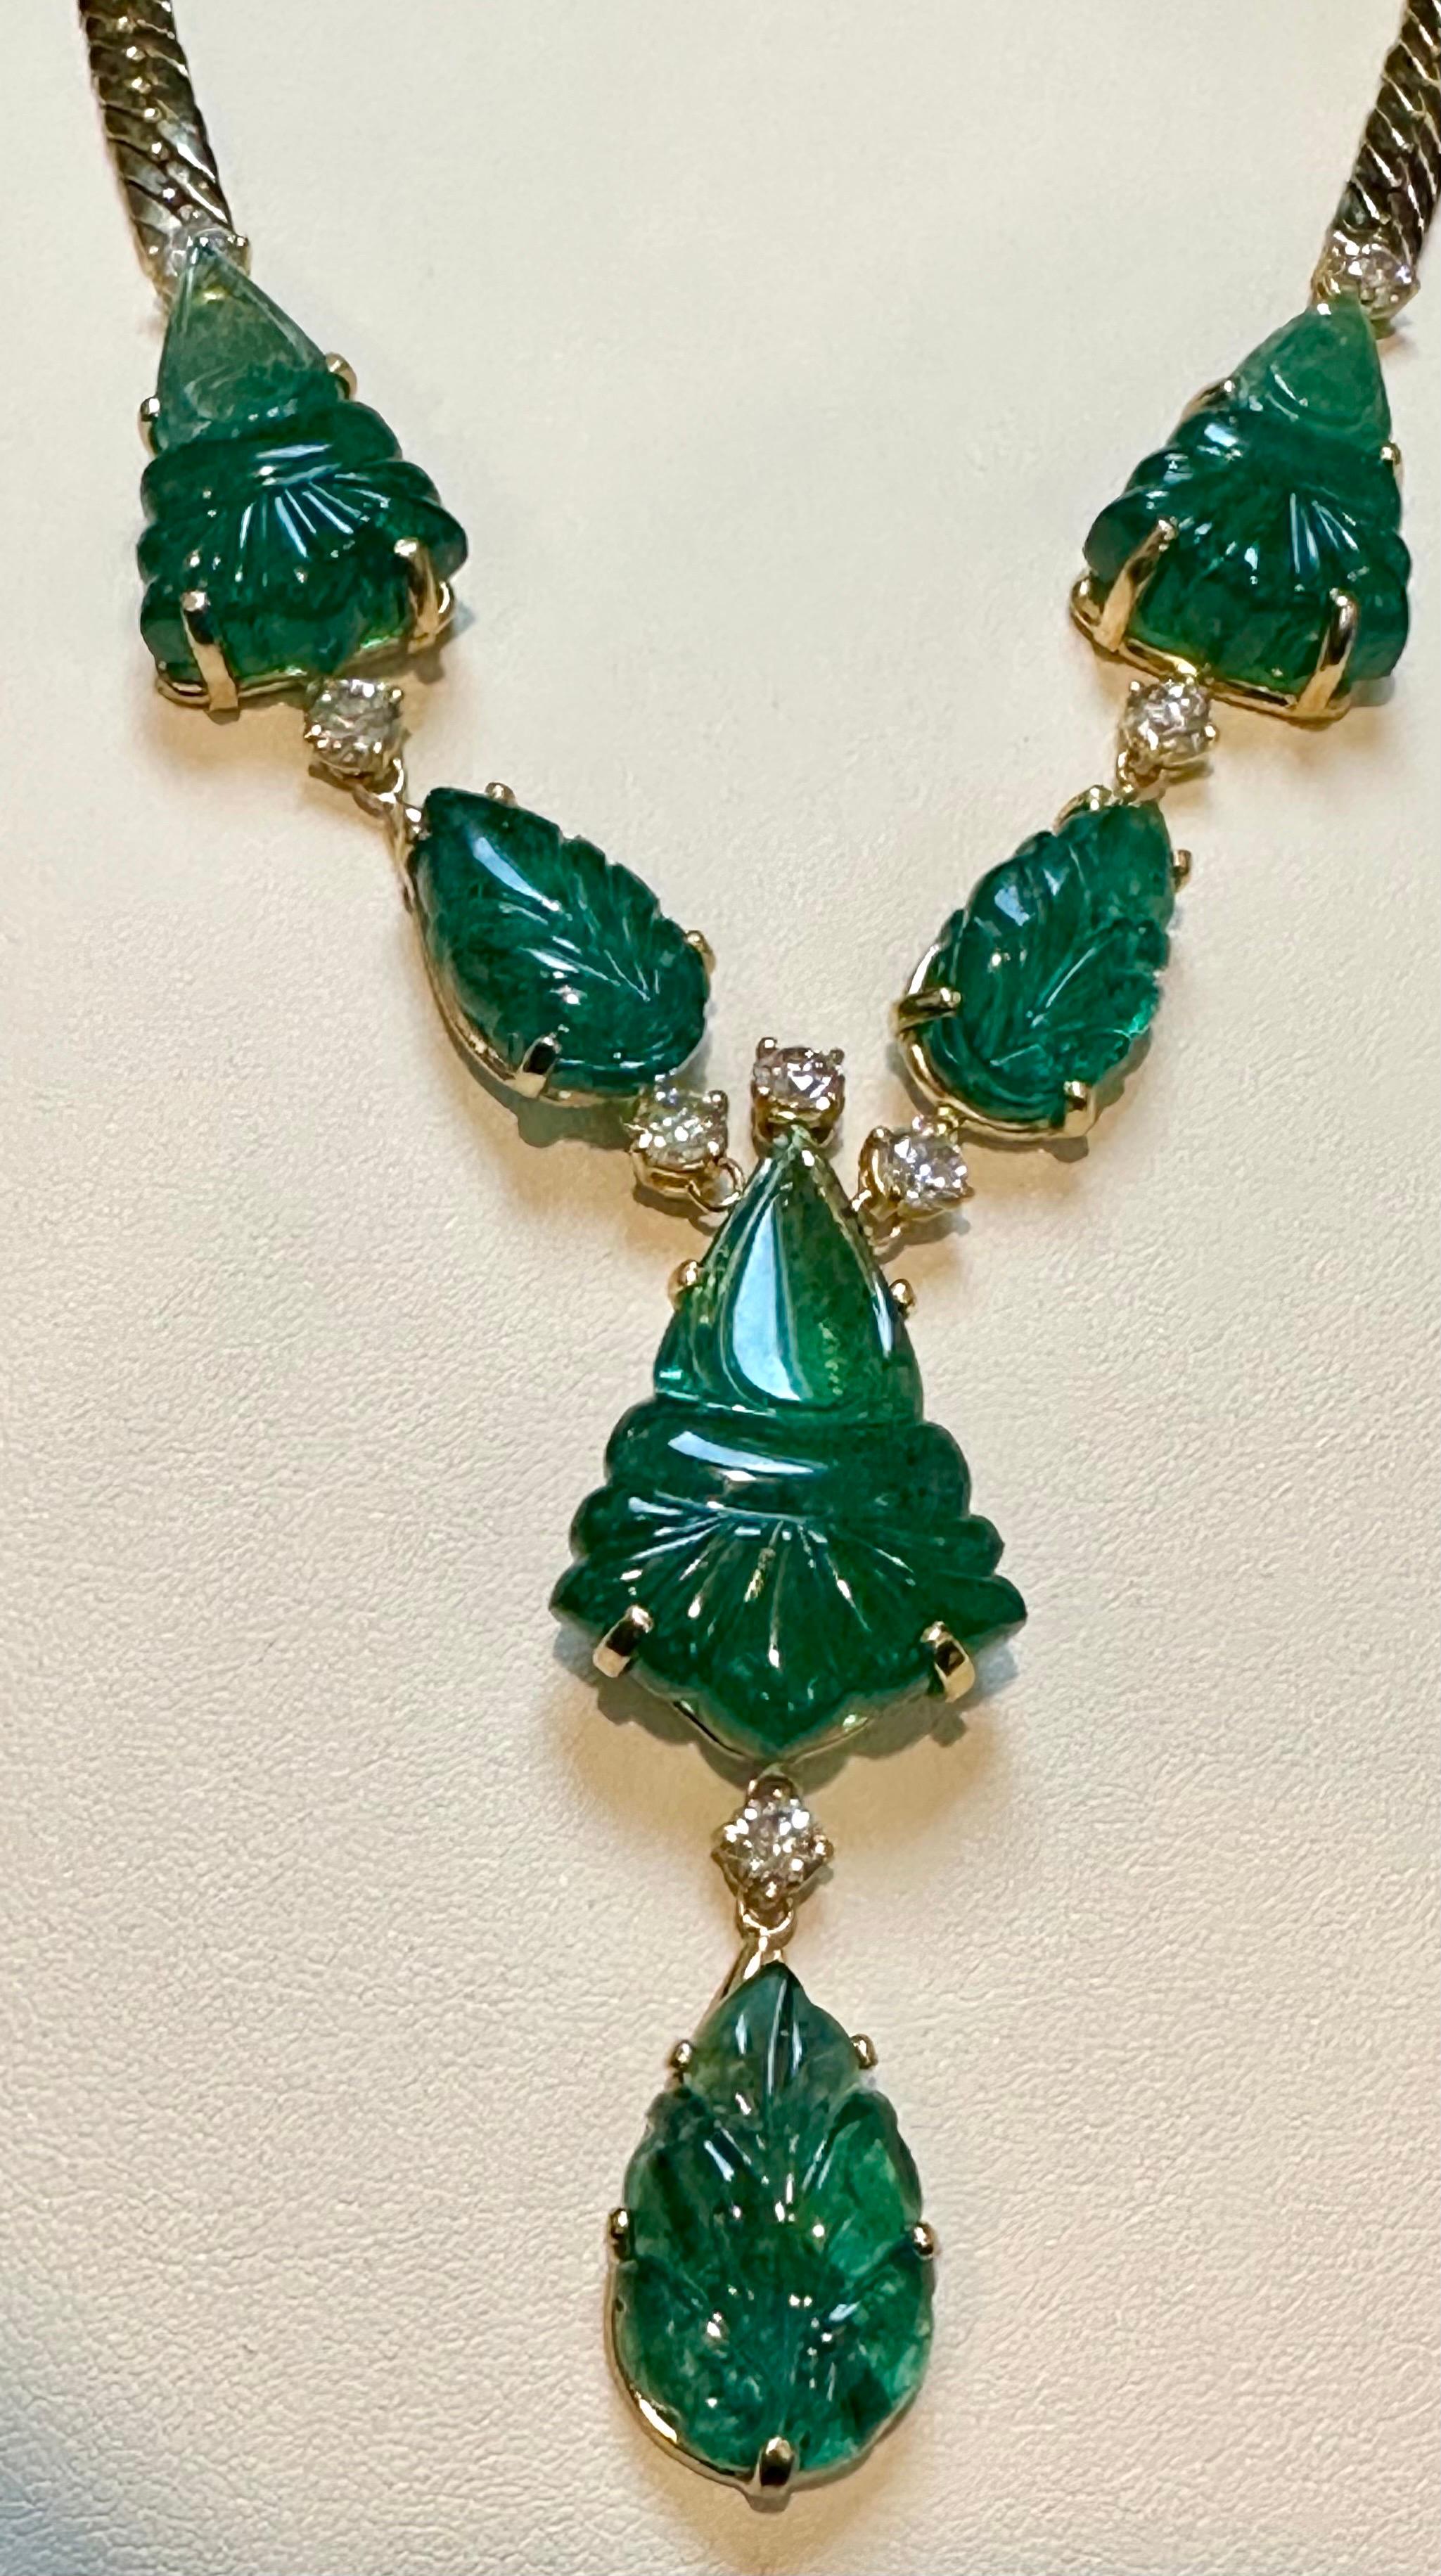 115 Ct Natural Carved Drop Emerald & 4 Ct Diamond  Necklace 18 Kt Gold Necklace In Excellent Condition For Sale In New York, NY